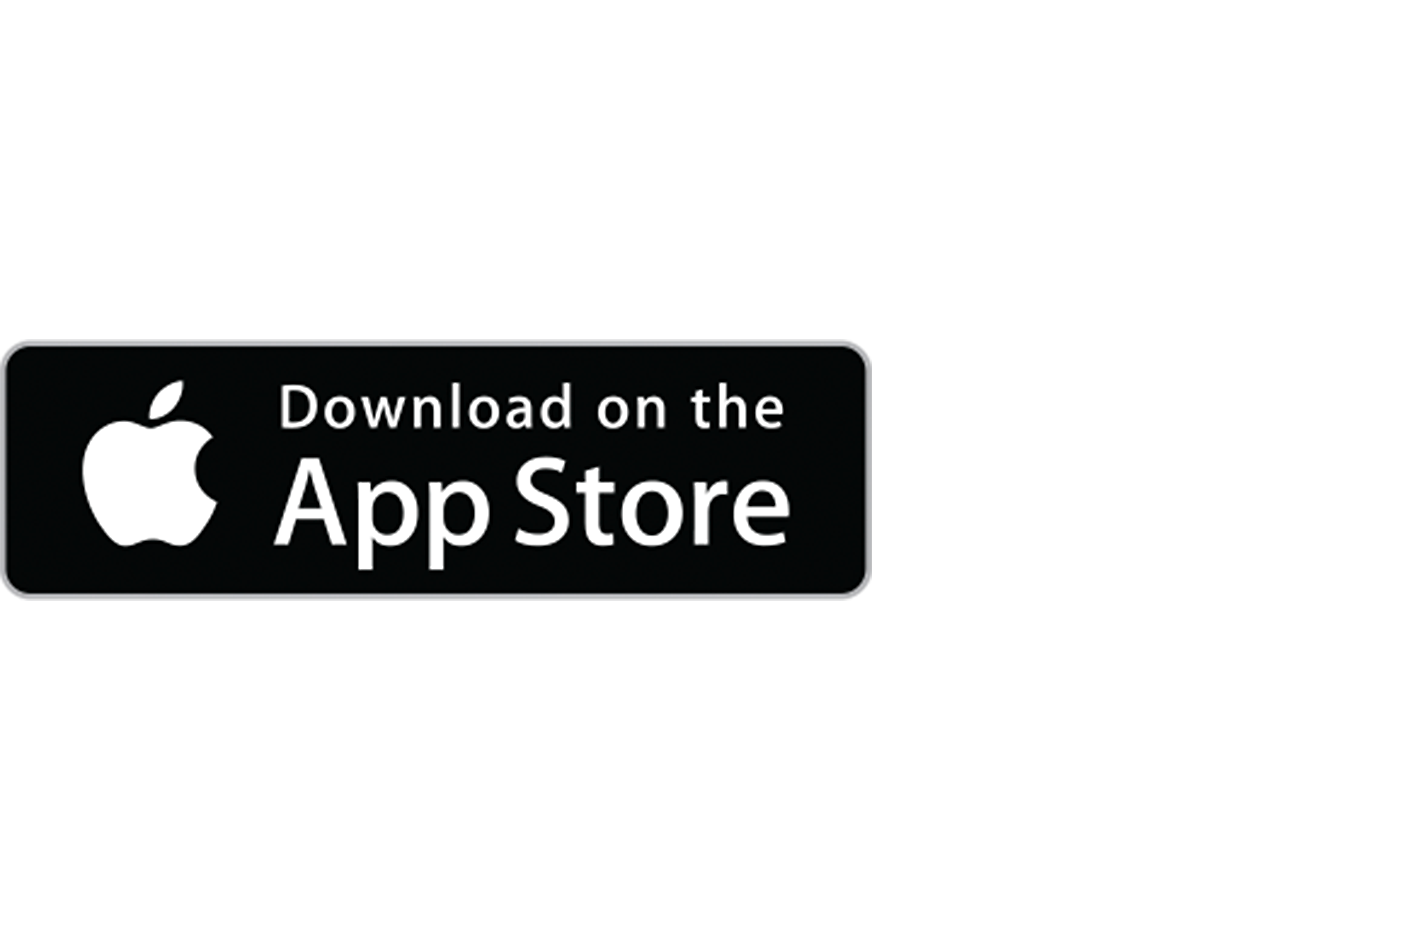 Image of the Apple App Store logo with the words "Download on the App Store" above